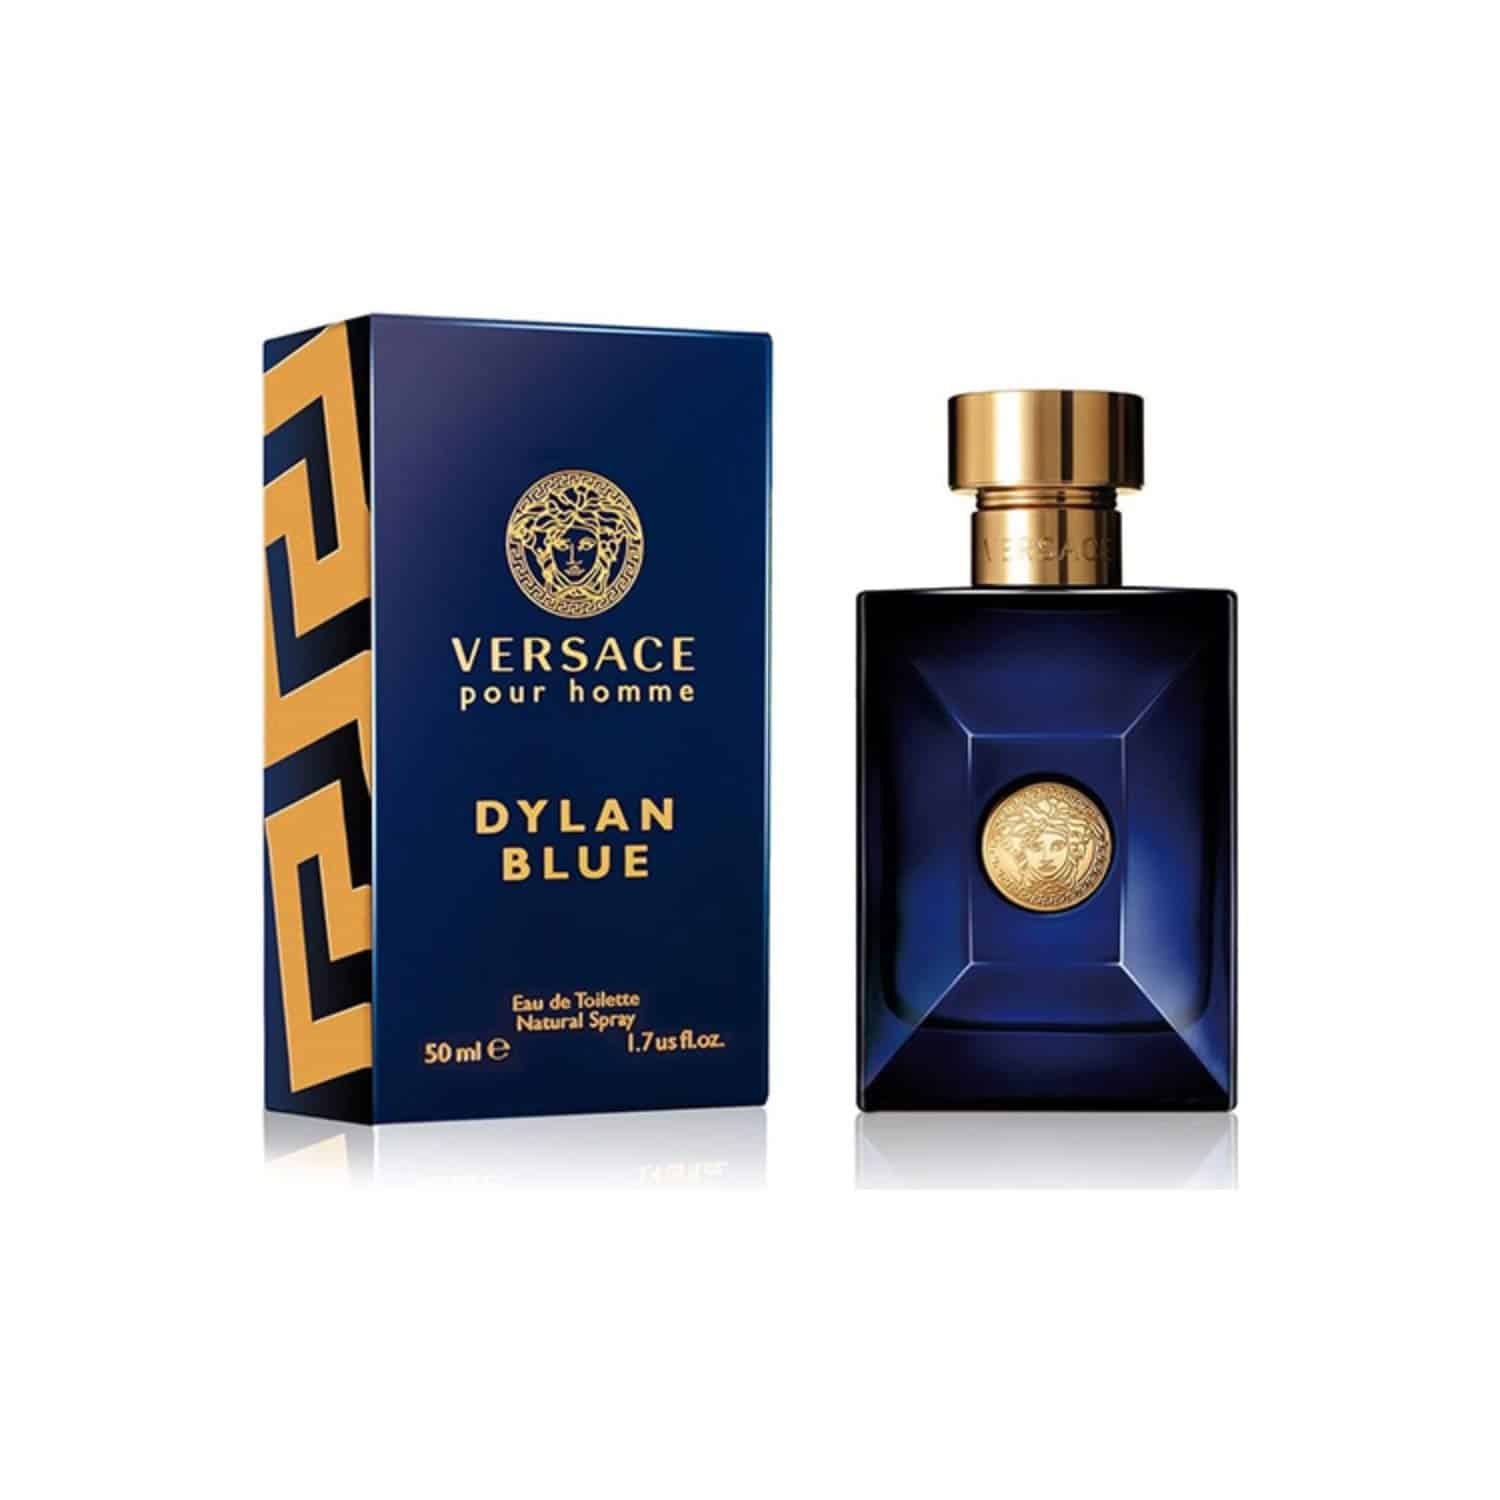 Versace Cologne: Power of Masculine Elegance